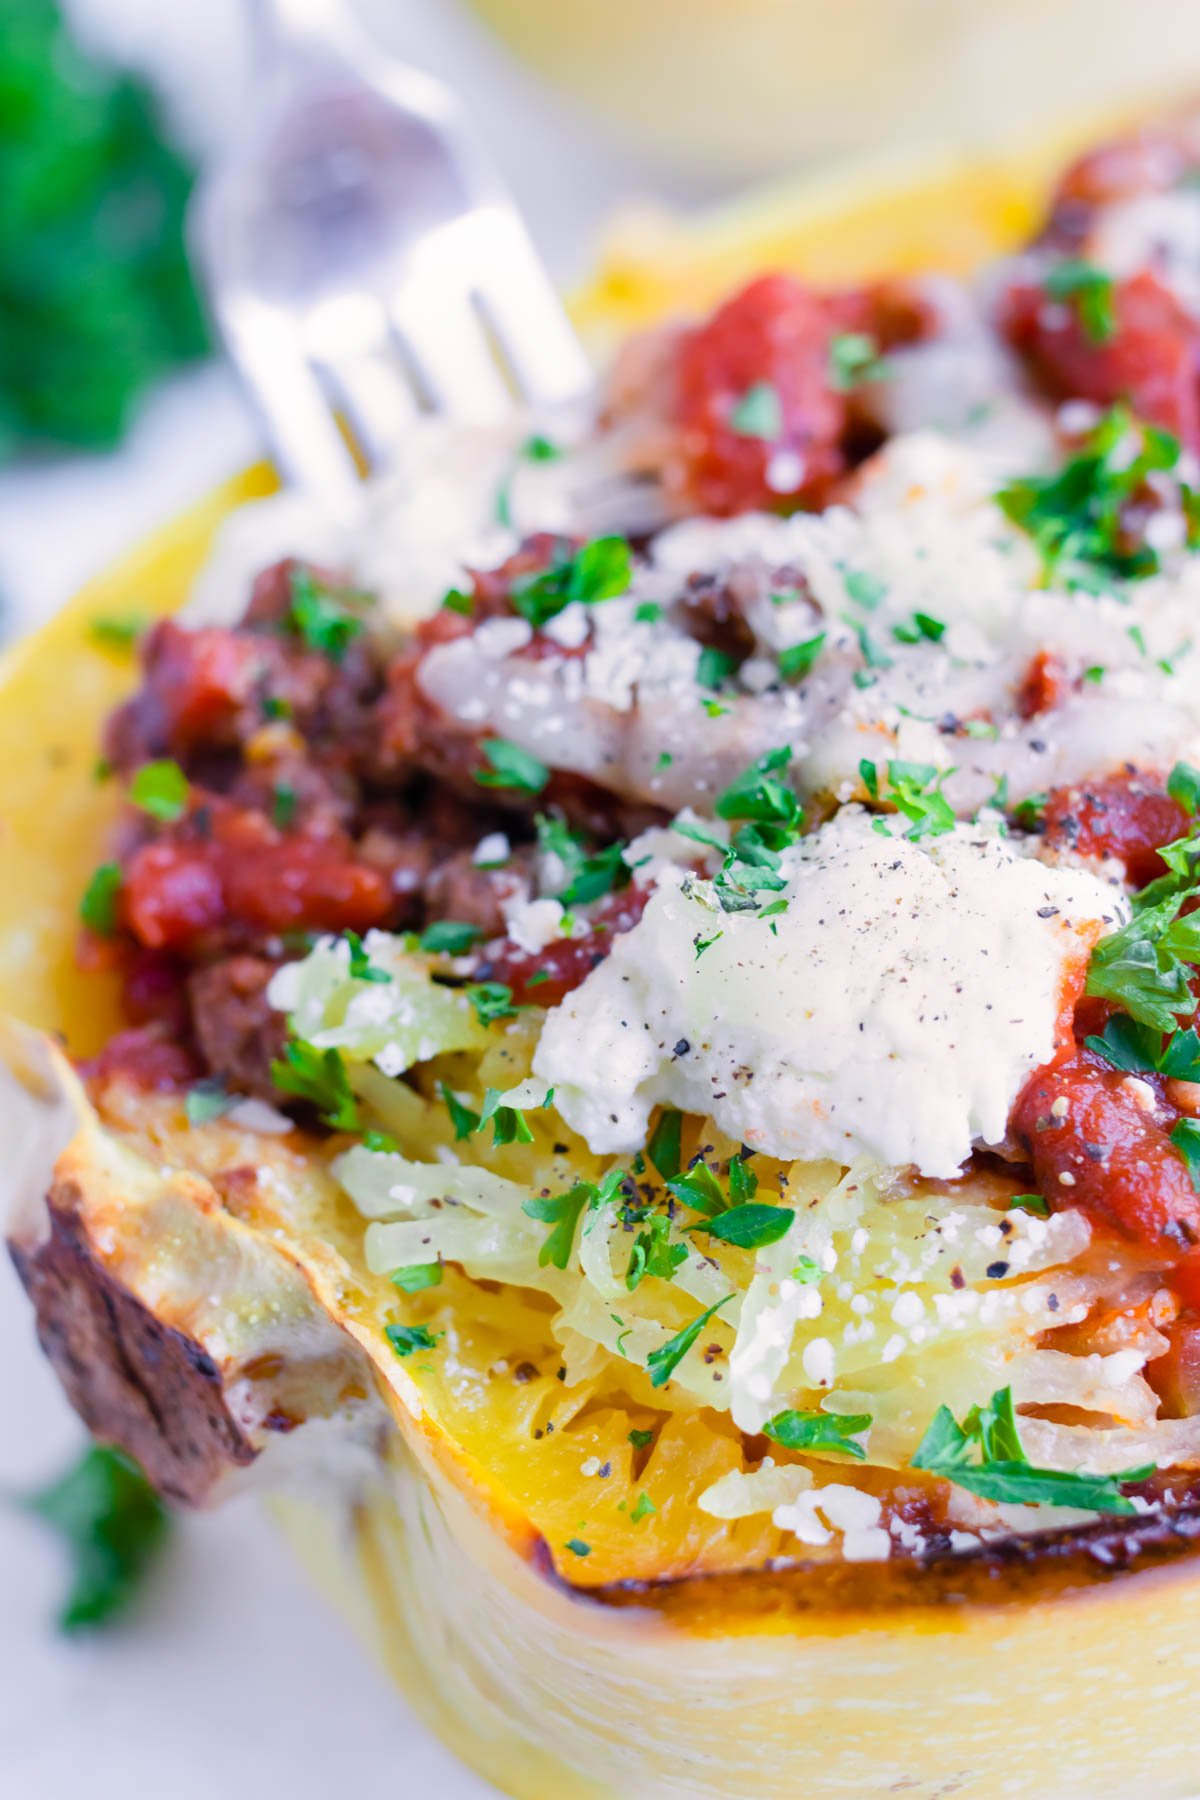 Lasagna Spaghetti Squash boats are packed with ground turkey or ground beef, tomato sauce, and cheese.